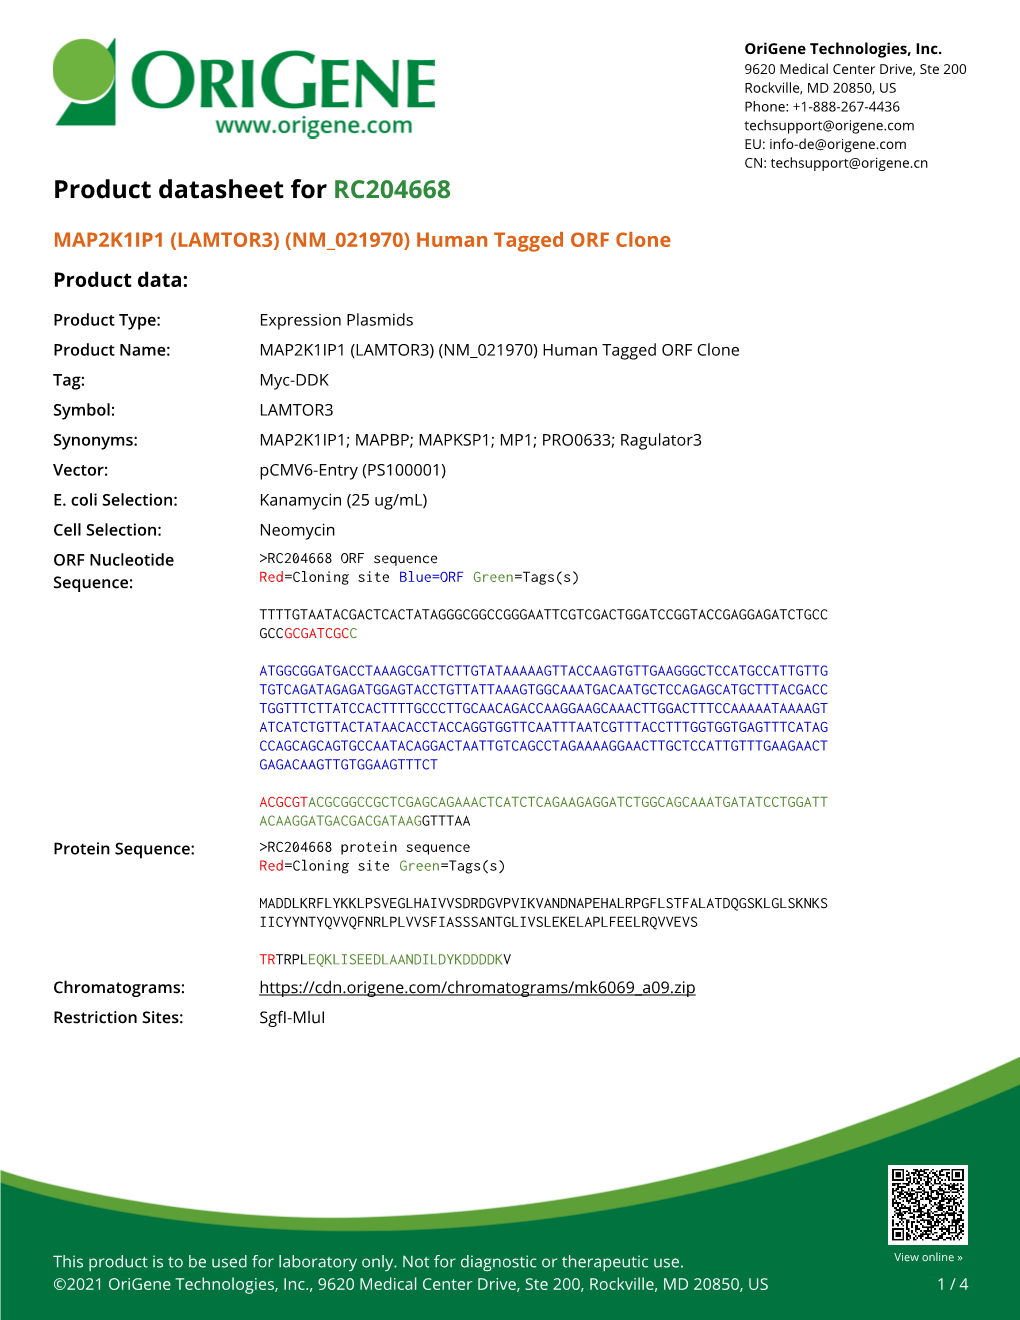 MAP2K1IP1 (LAMTOR3) (NM 021970) Human Tagged ORF Clone Product Data